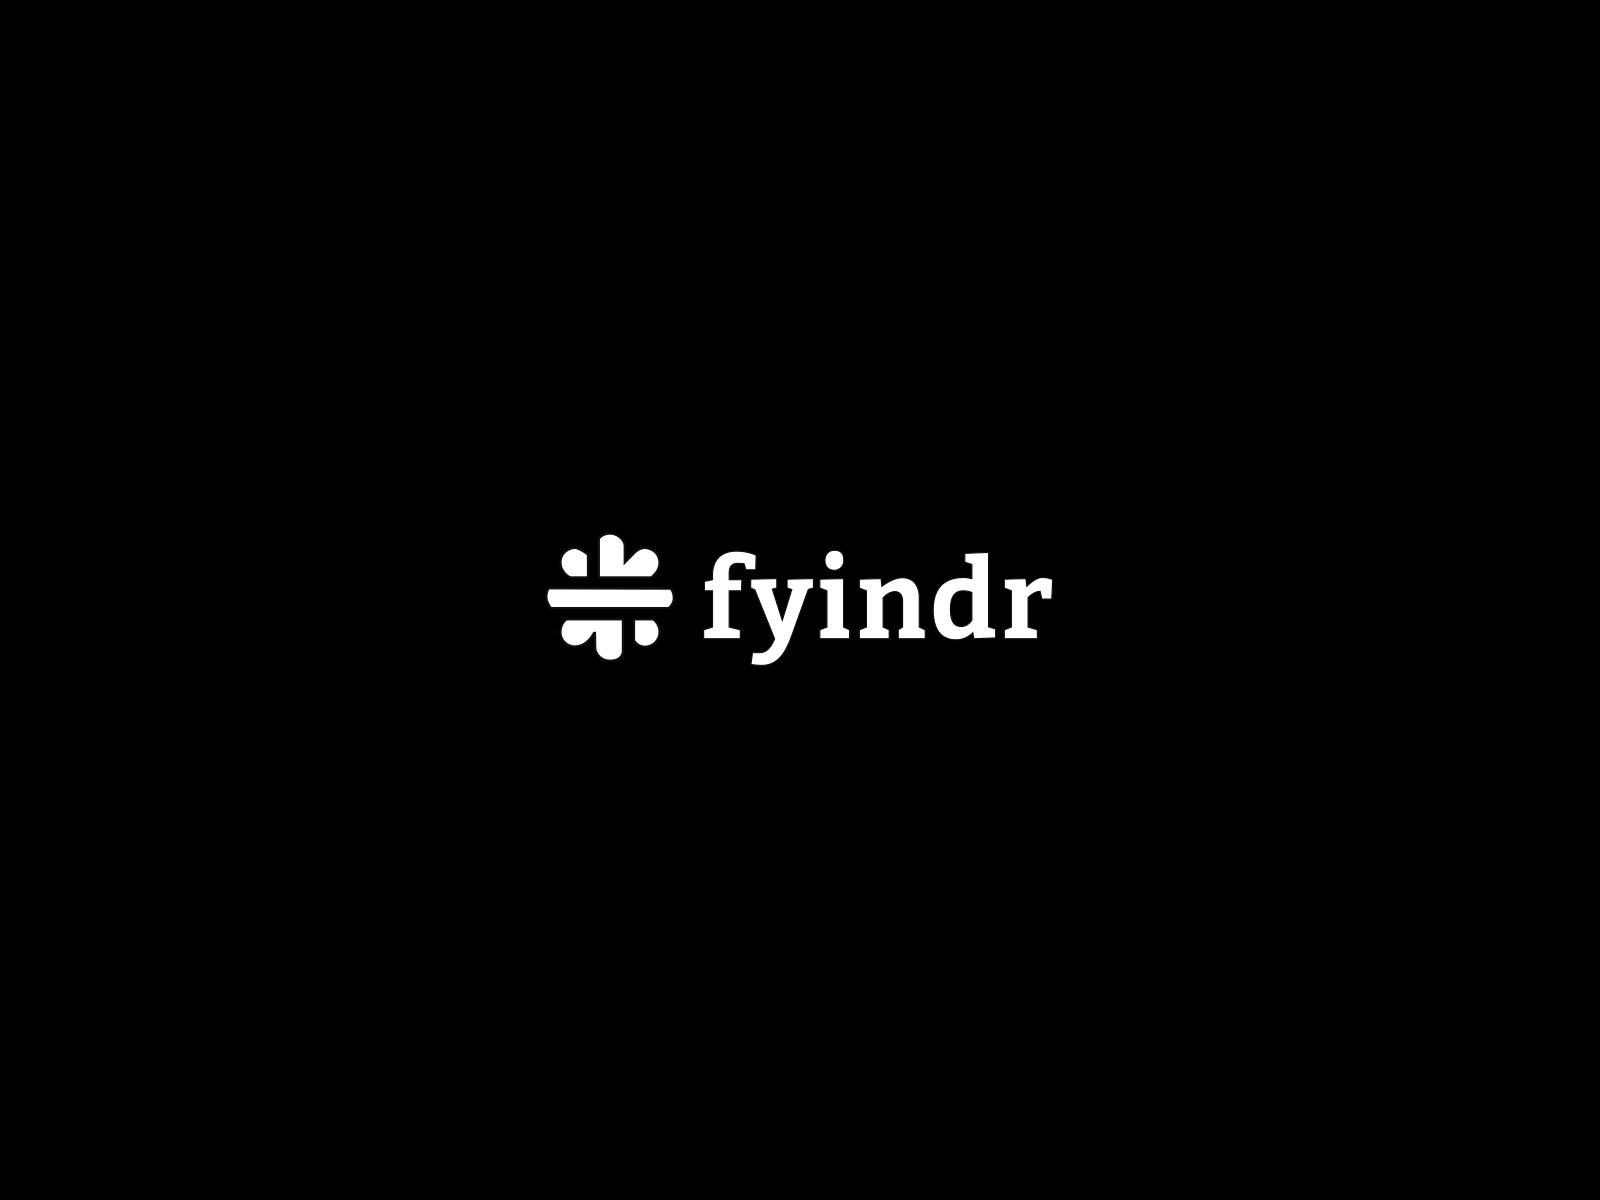 Fyindr approved logo by Gabriel Dominicali on Dribbble